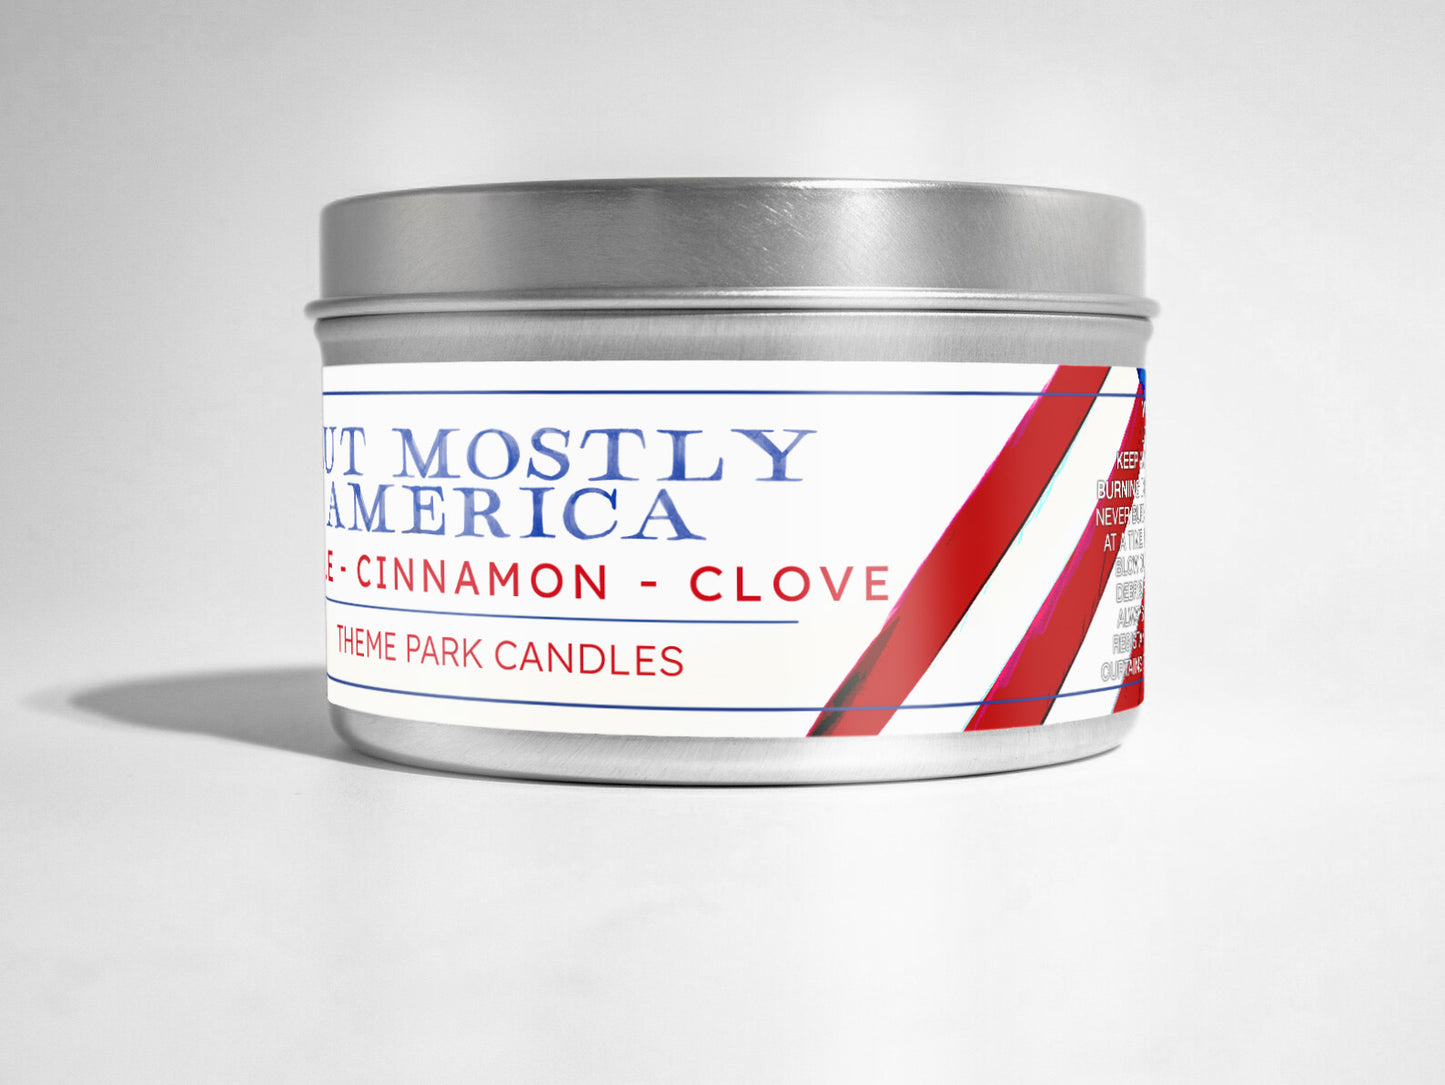 But Mostly America Candle